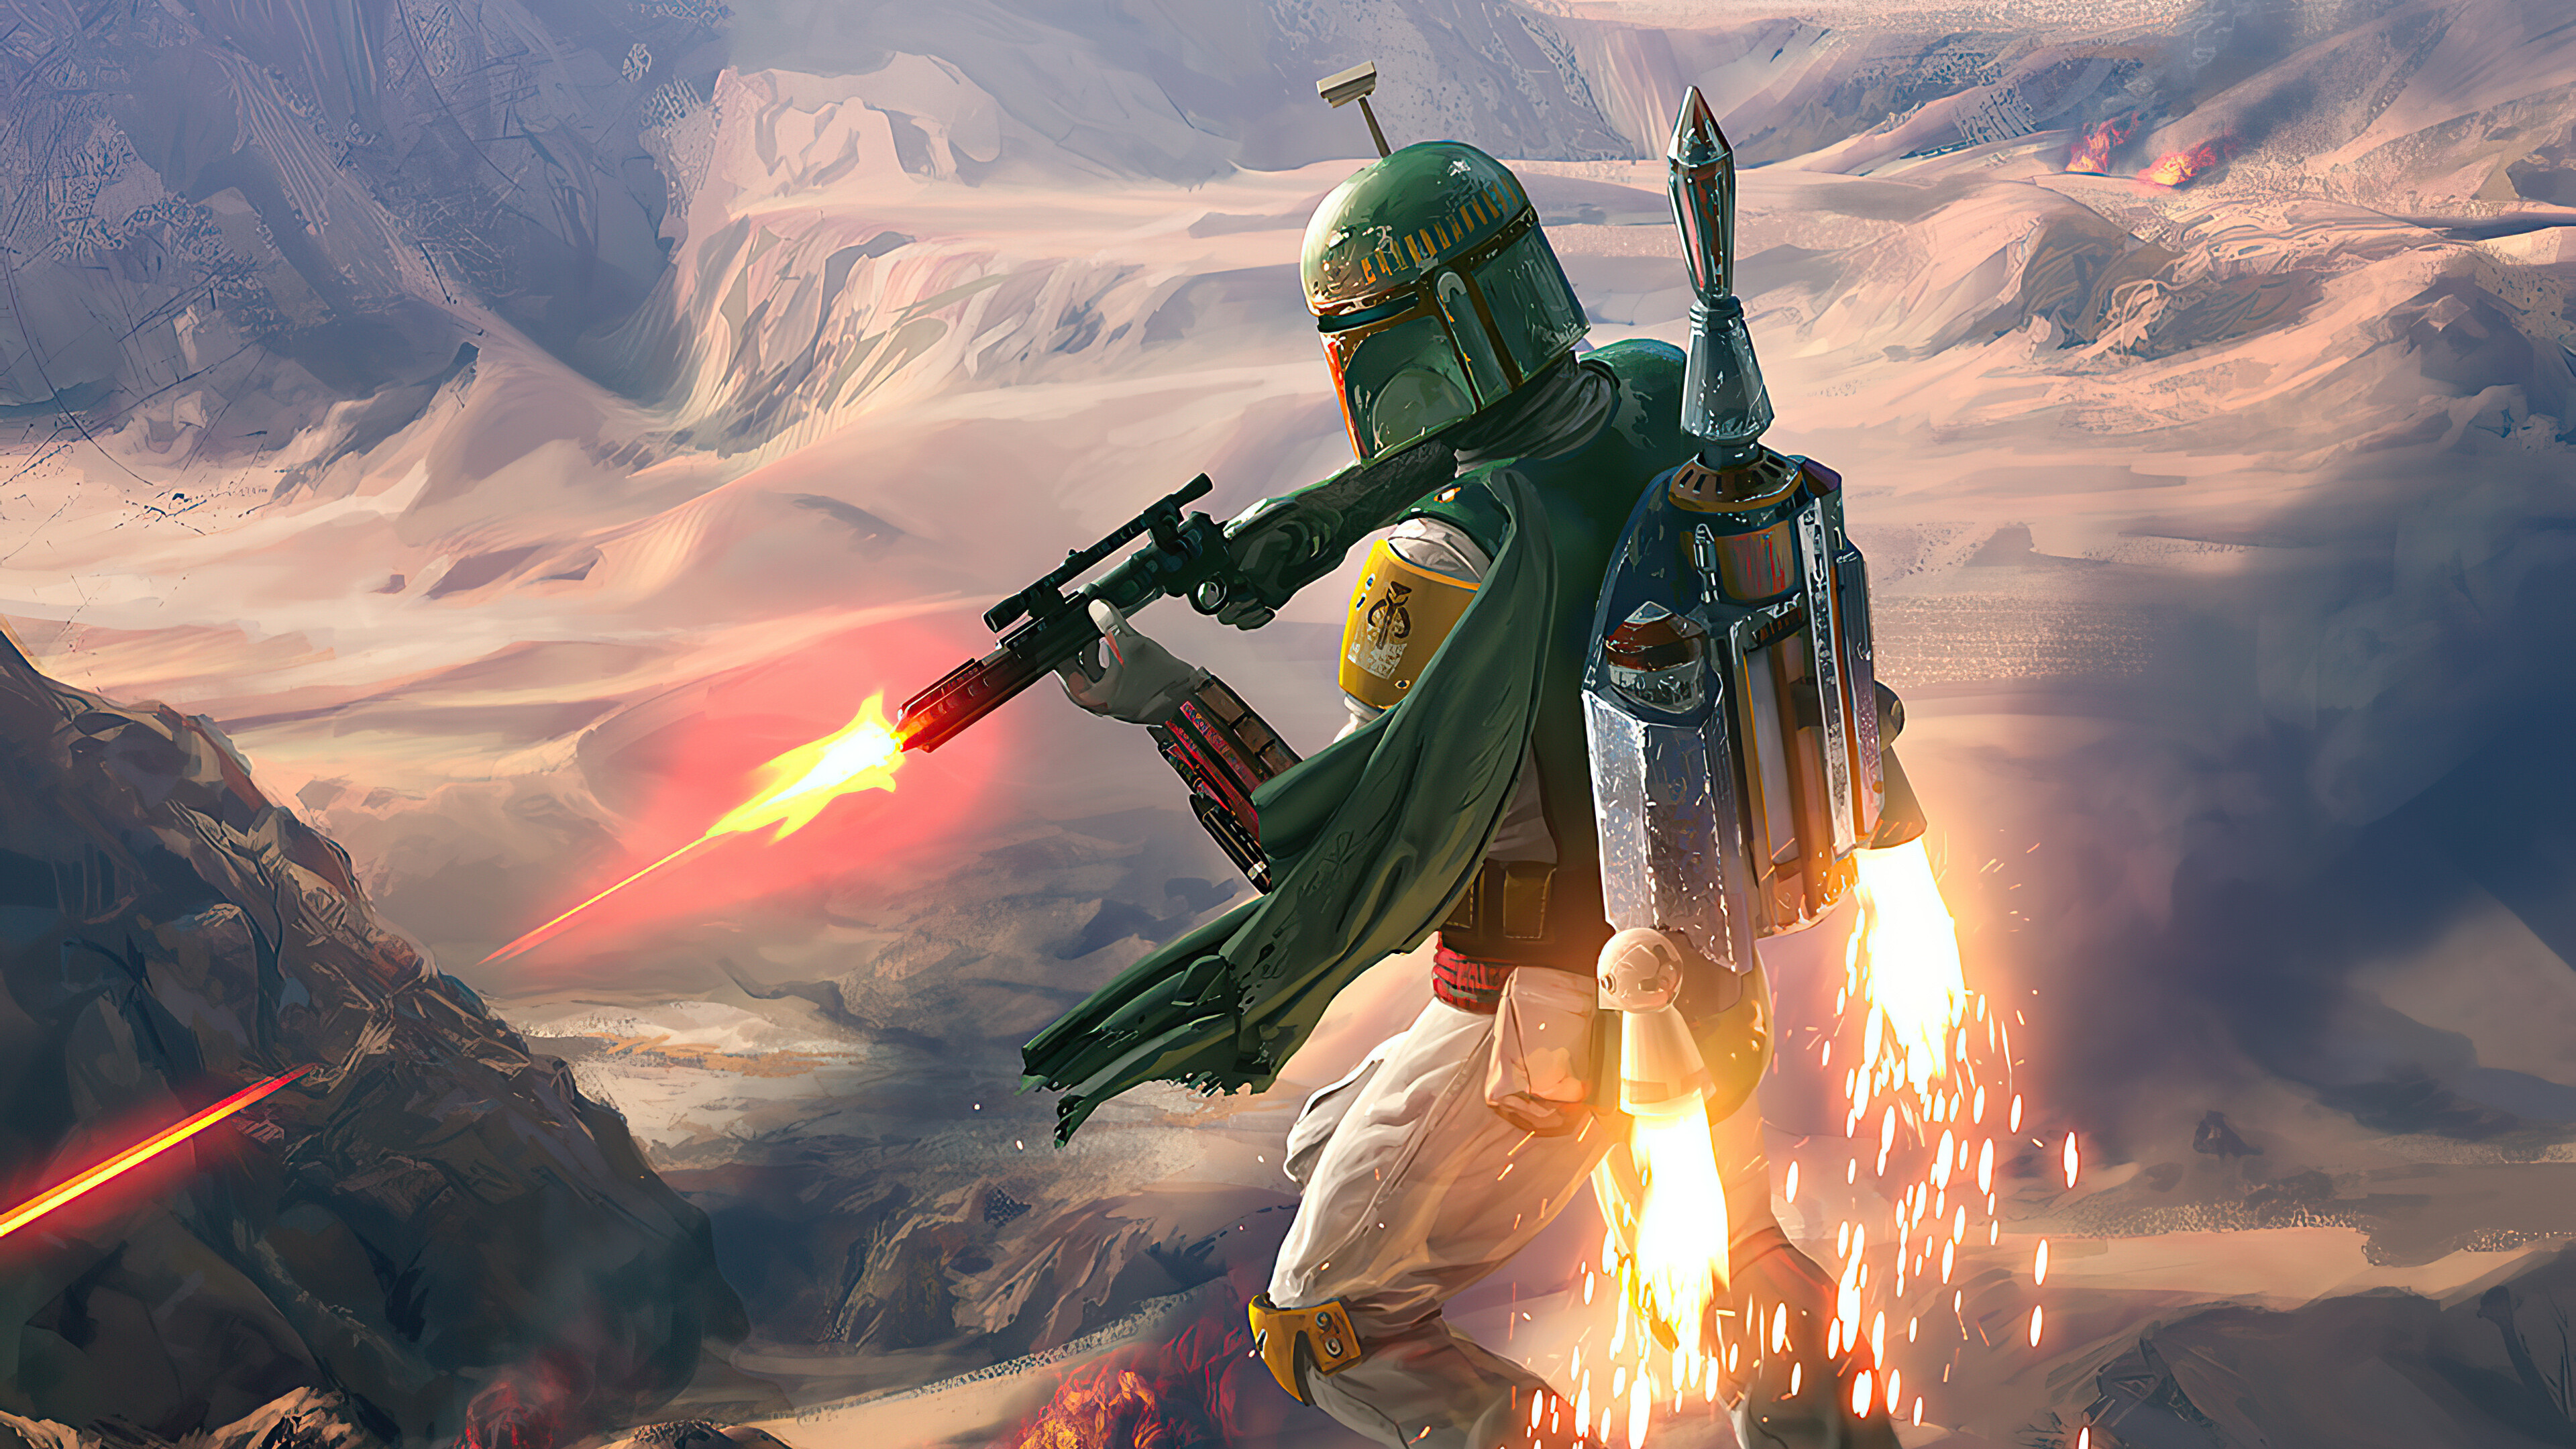 The Book of Boba Fett: A fictional character in the Star Wars franchise, Temuera Morrison. 3840x2160 4K Wallpaper.